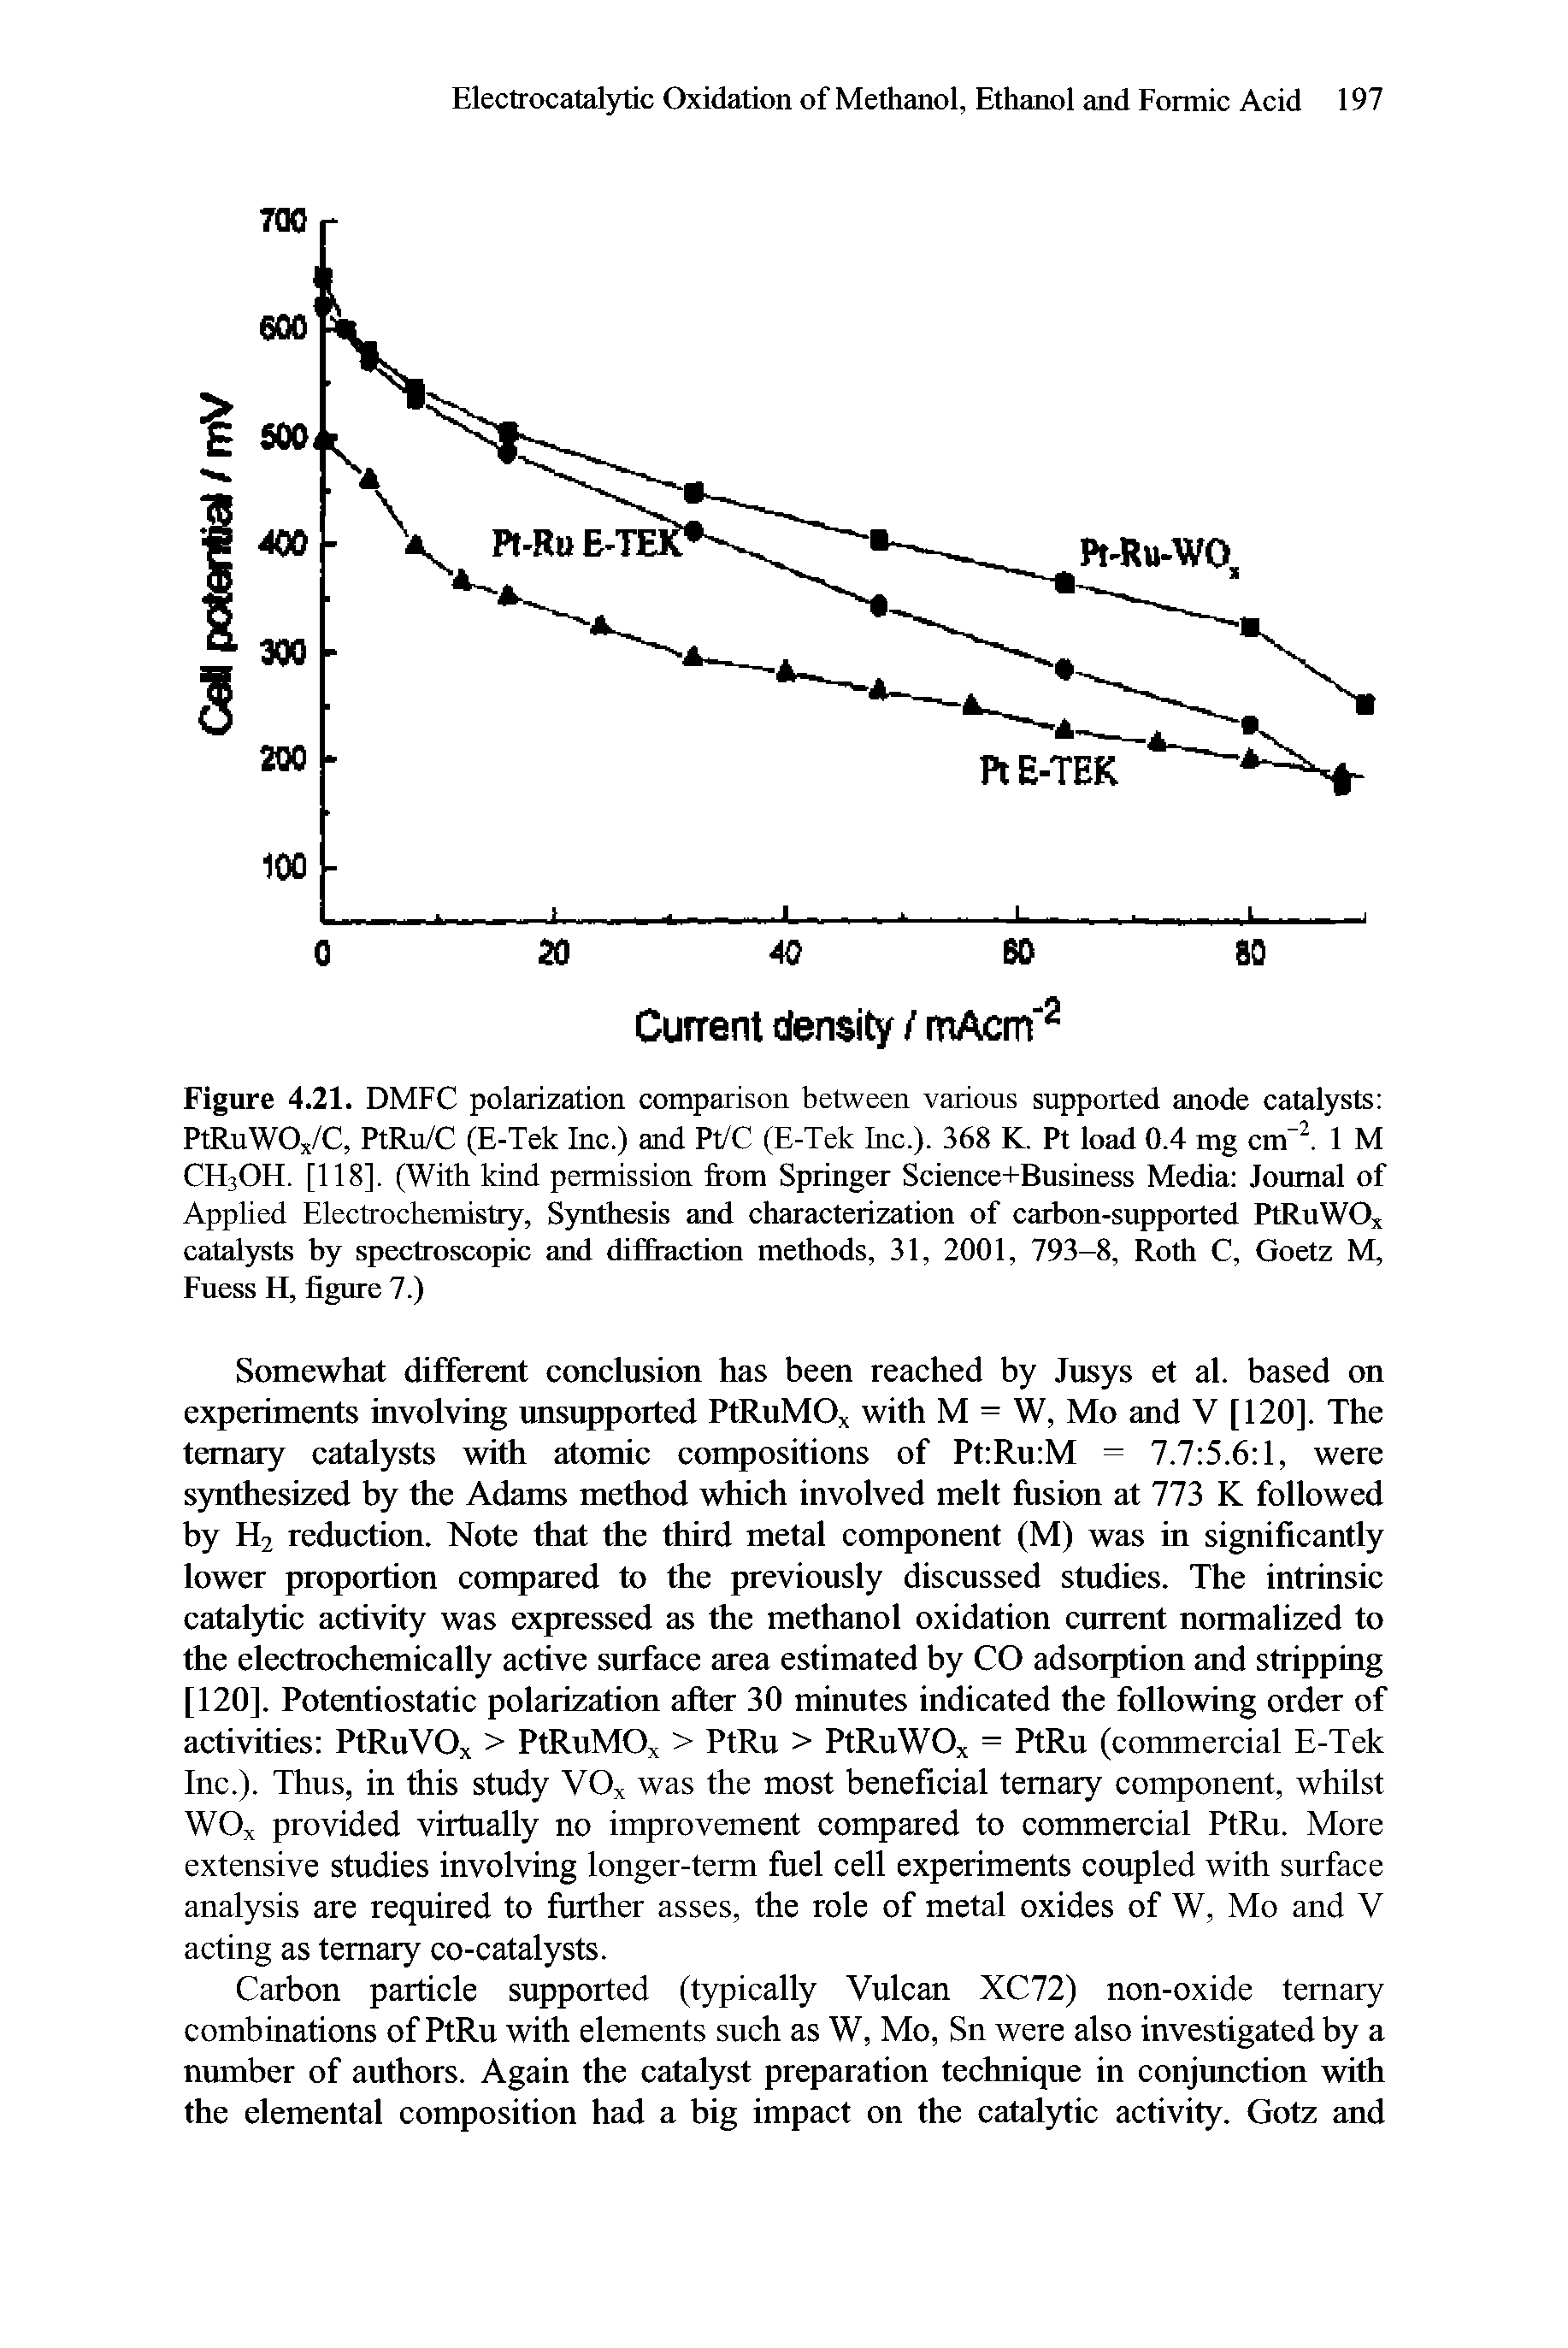 Figure 4.21. DMFC polarization comparison between various supported anode catalysts PtRuWOx/C, PtRu/C (E-Tek Inc.) and Pt/C (E-Tek Inc.). 368 K. Pt load 0.4 mg cm l 1 M CH3OH. [118], (With kind permission from Springer Science+Business Media Journal of Applied Electrochemistry, Synthesis and characterization of carbon-supported PtRuWOx catal5rsts by spectroscopic and diffraction methods, 31, 2001, 793-8, Roth C, Goetz M, Fuess H, figure 7.)...